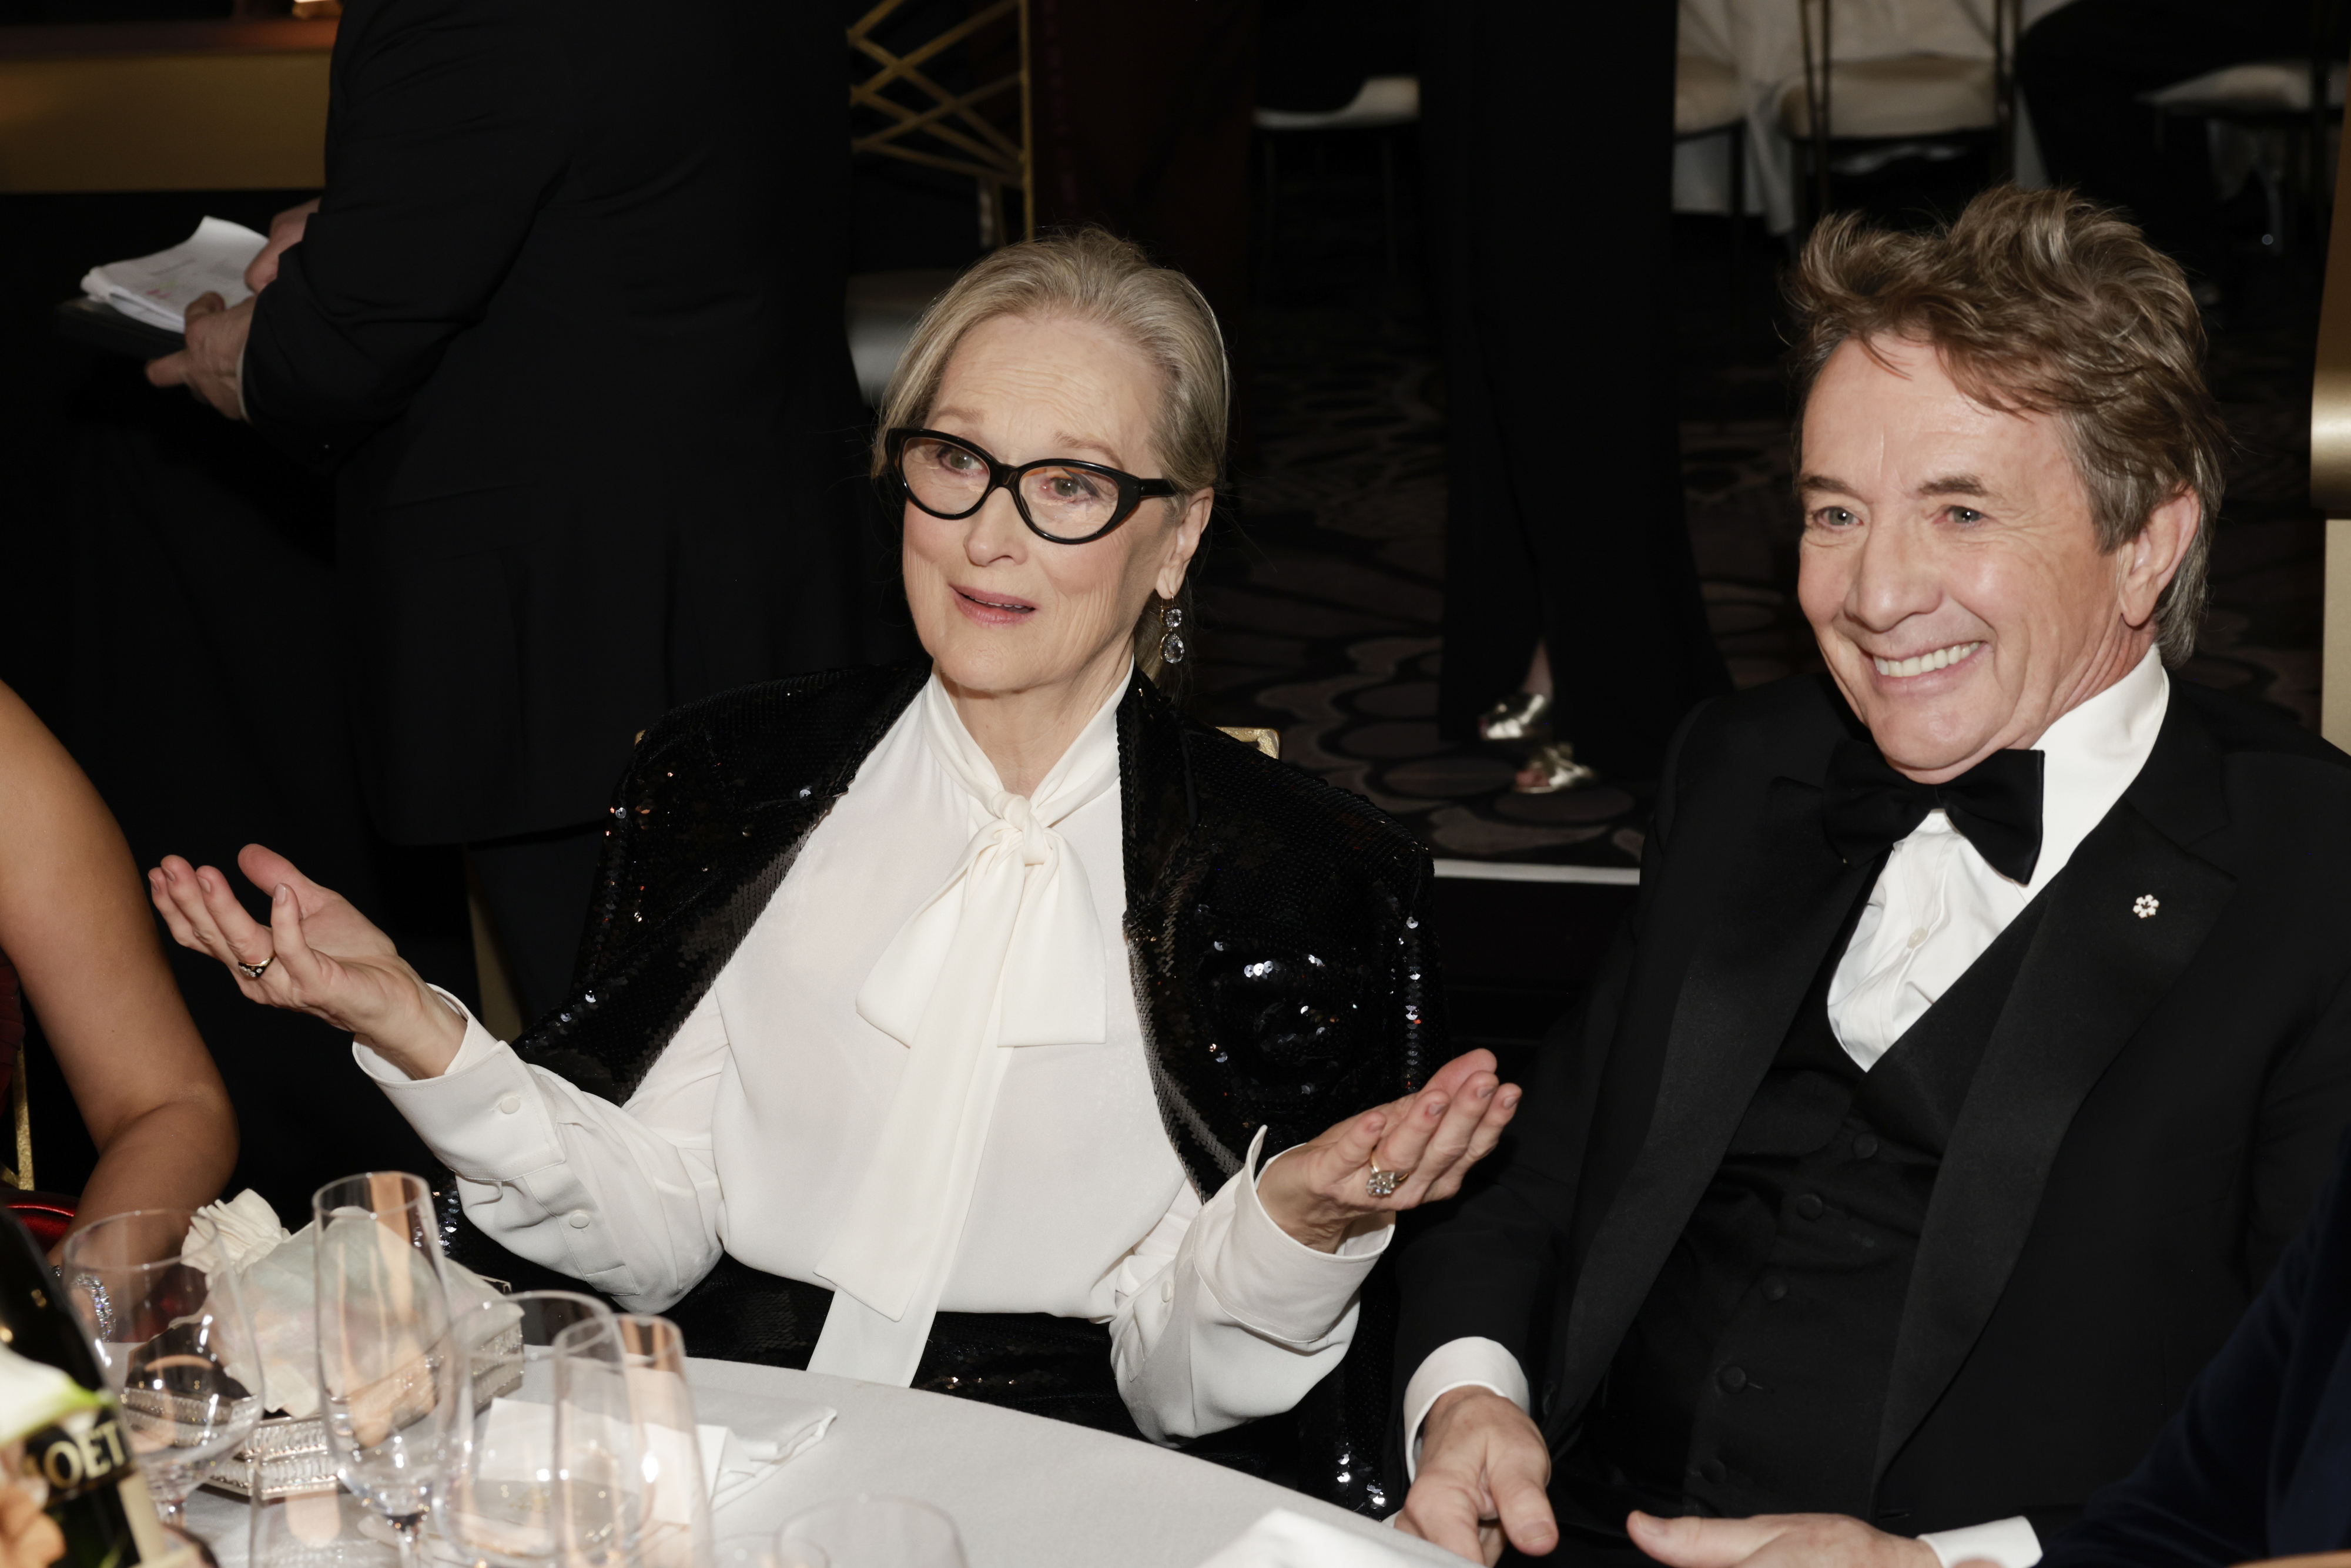 Two celebrities seated at an event; woman in a white blouse with black details, man in a tuxedo